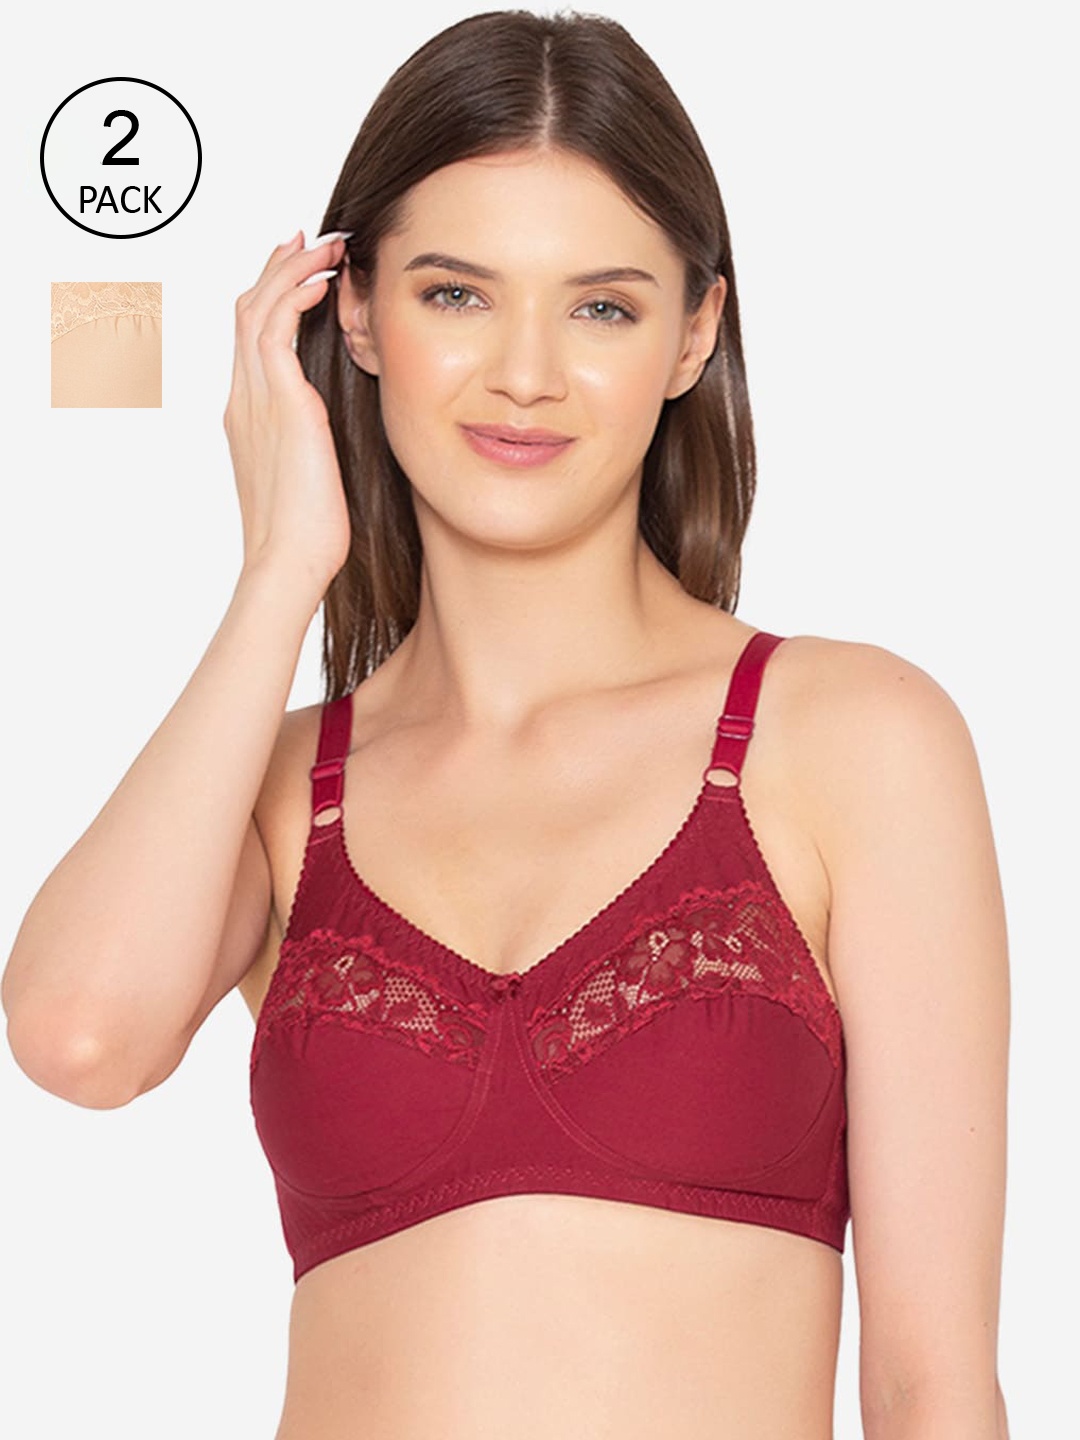 

GROVERSONS Paris Beauty Women's Cotton Full coverage Non-Padded Non-Wired Bra-COMB02, Maroon